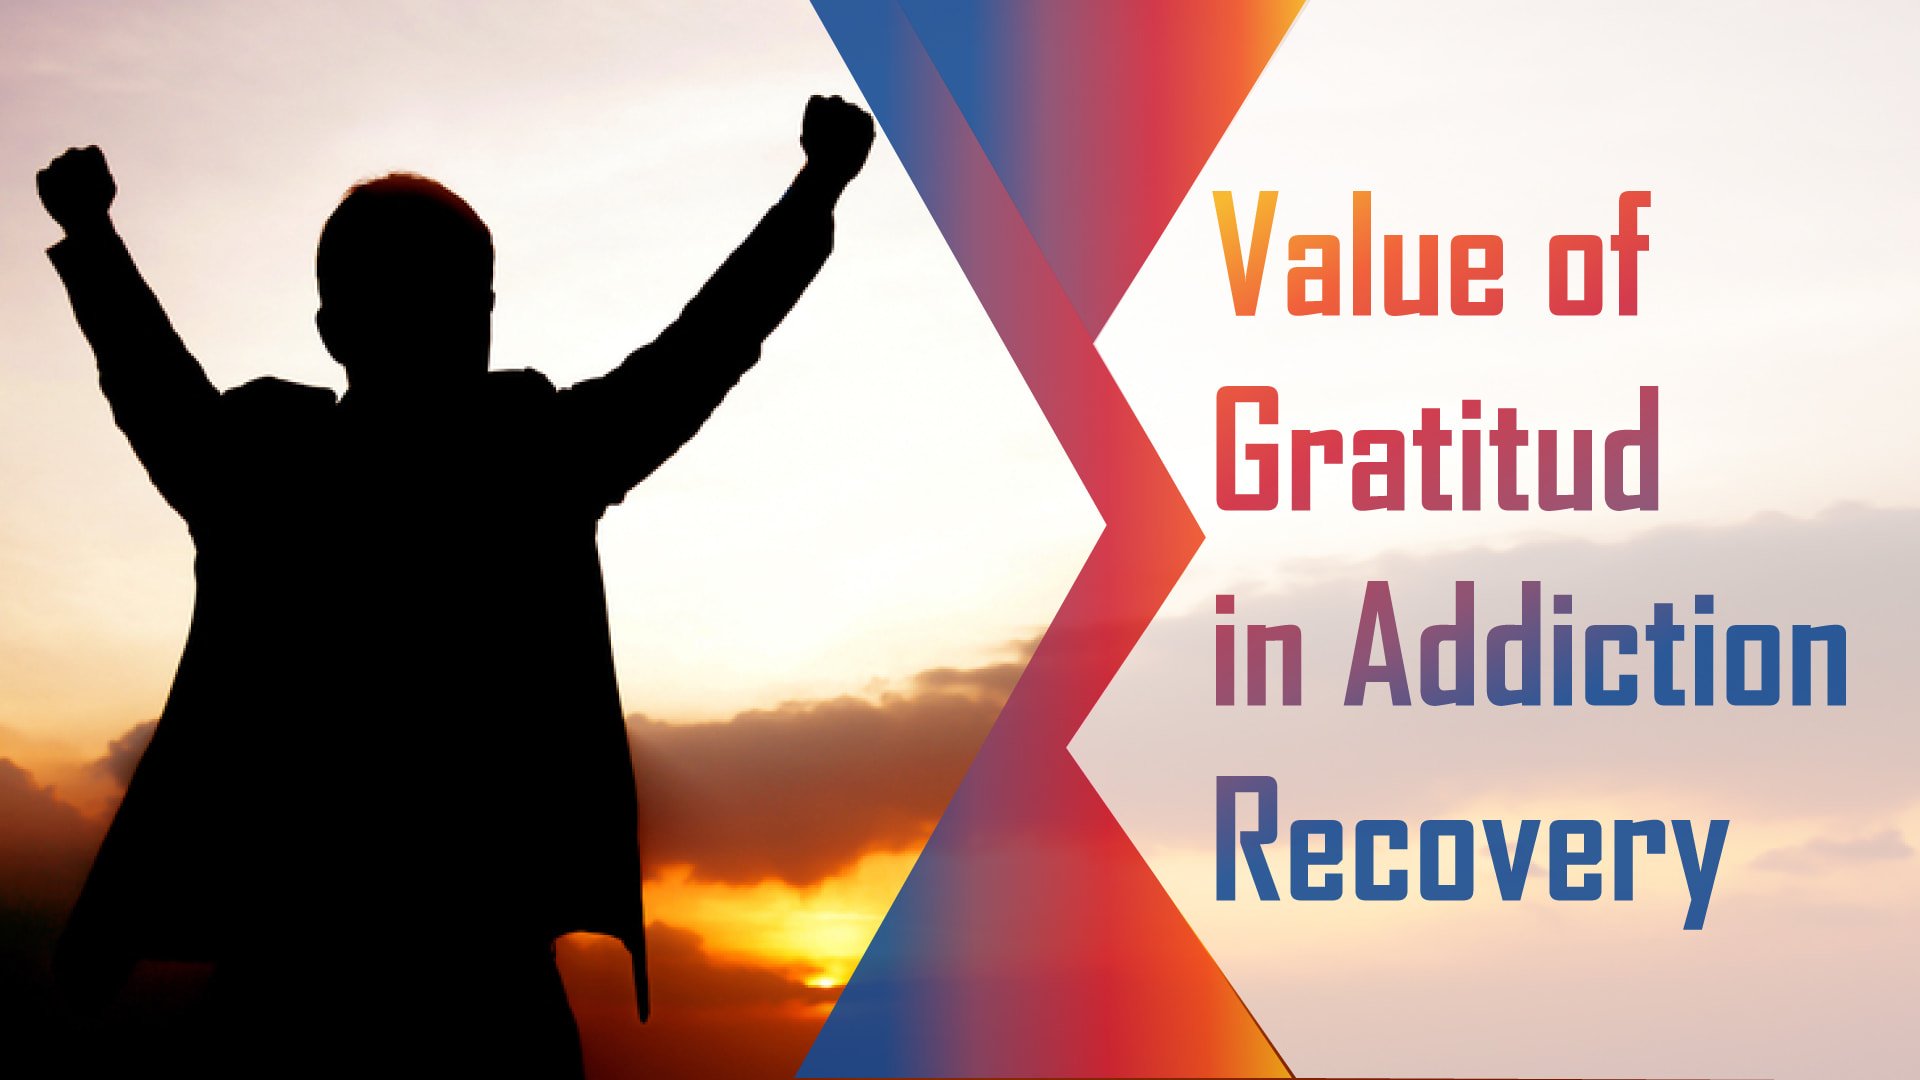 Value-of-Gratitude-in-Addiction-Recovery